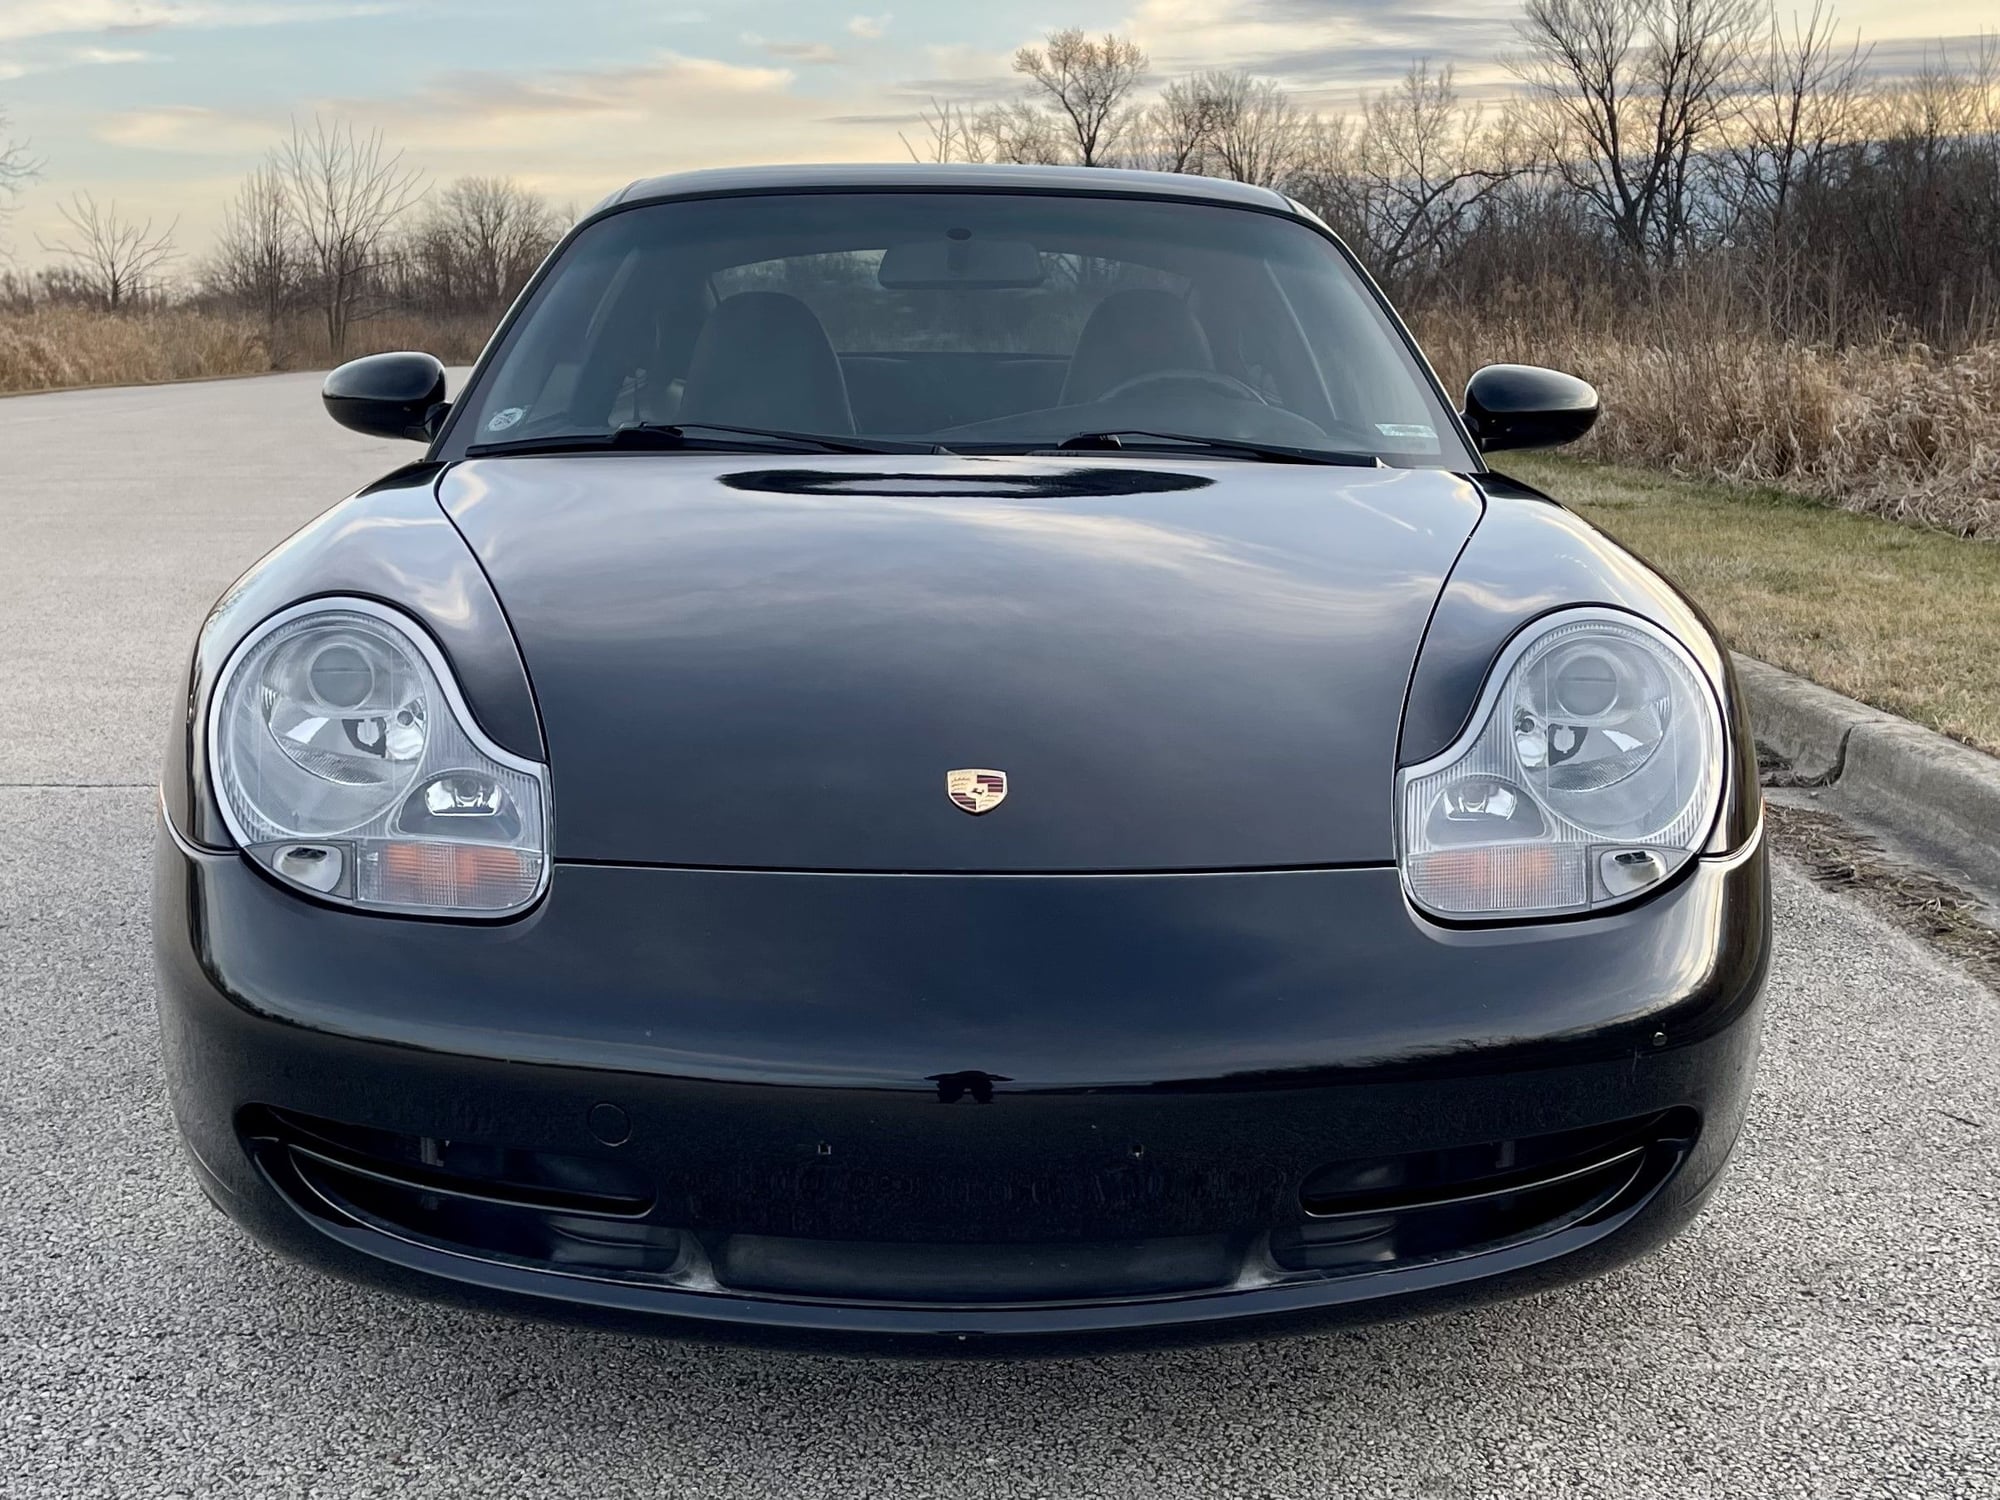 2000 Porsche 911 - 2000 Porsche 911 (996 C2), 6-speed manual, 75k mi, Black/Black, IMS/RMS/clutch, Clean - Used - VIN WP0AA2997YS622190 - 75,500 Miles - 6 cyl - 2WD - Manual - Coupe - Black - Chicago, IL 60010, United States